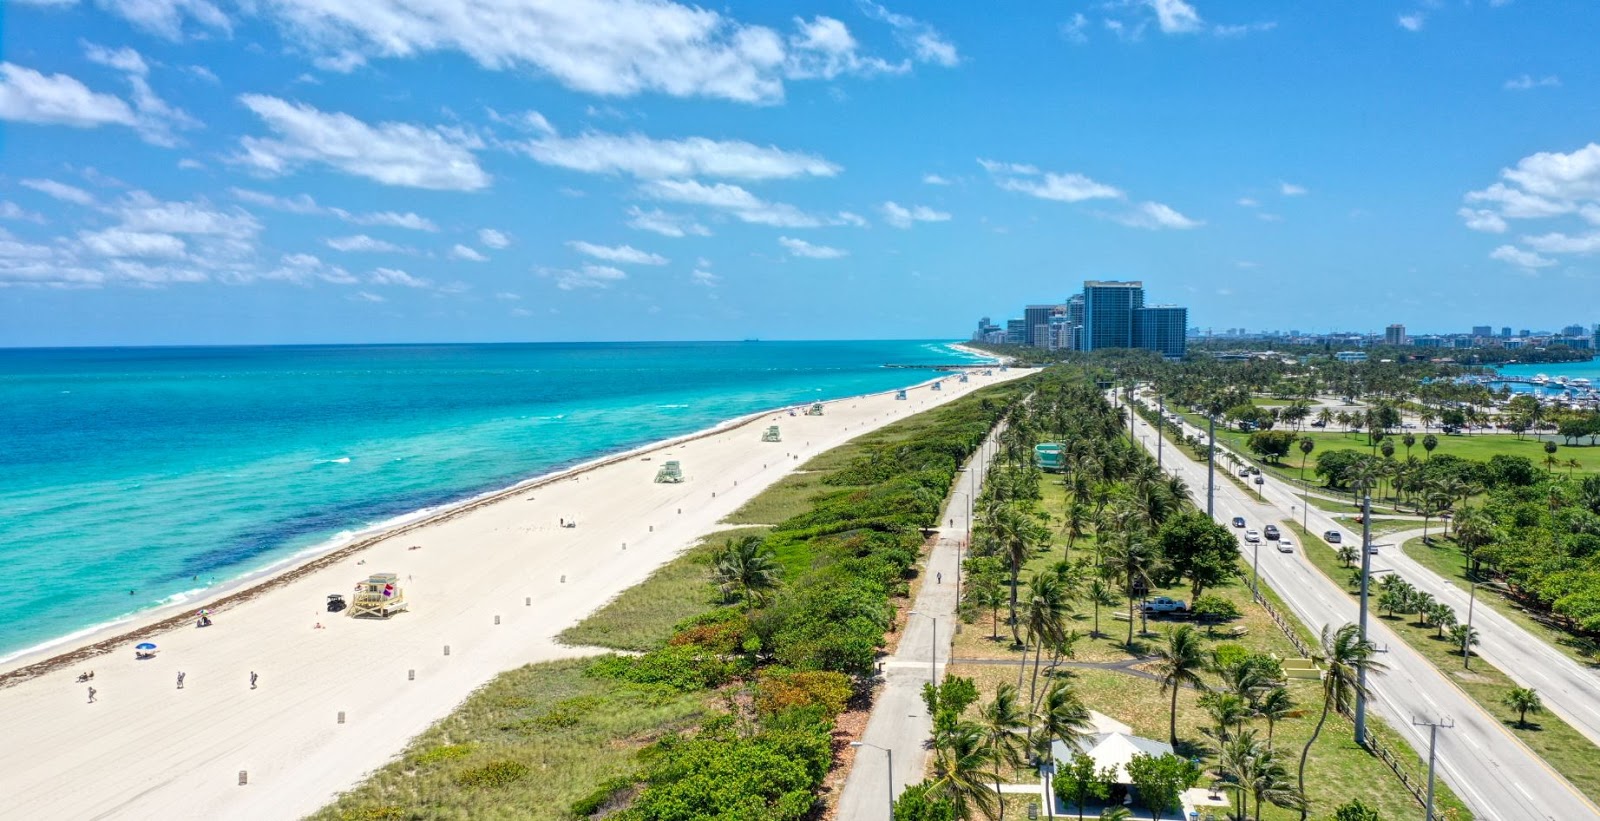 Photo of Haulover beach with spacious shore